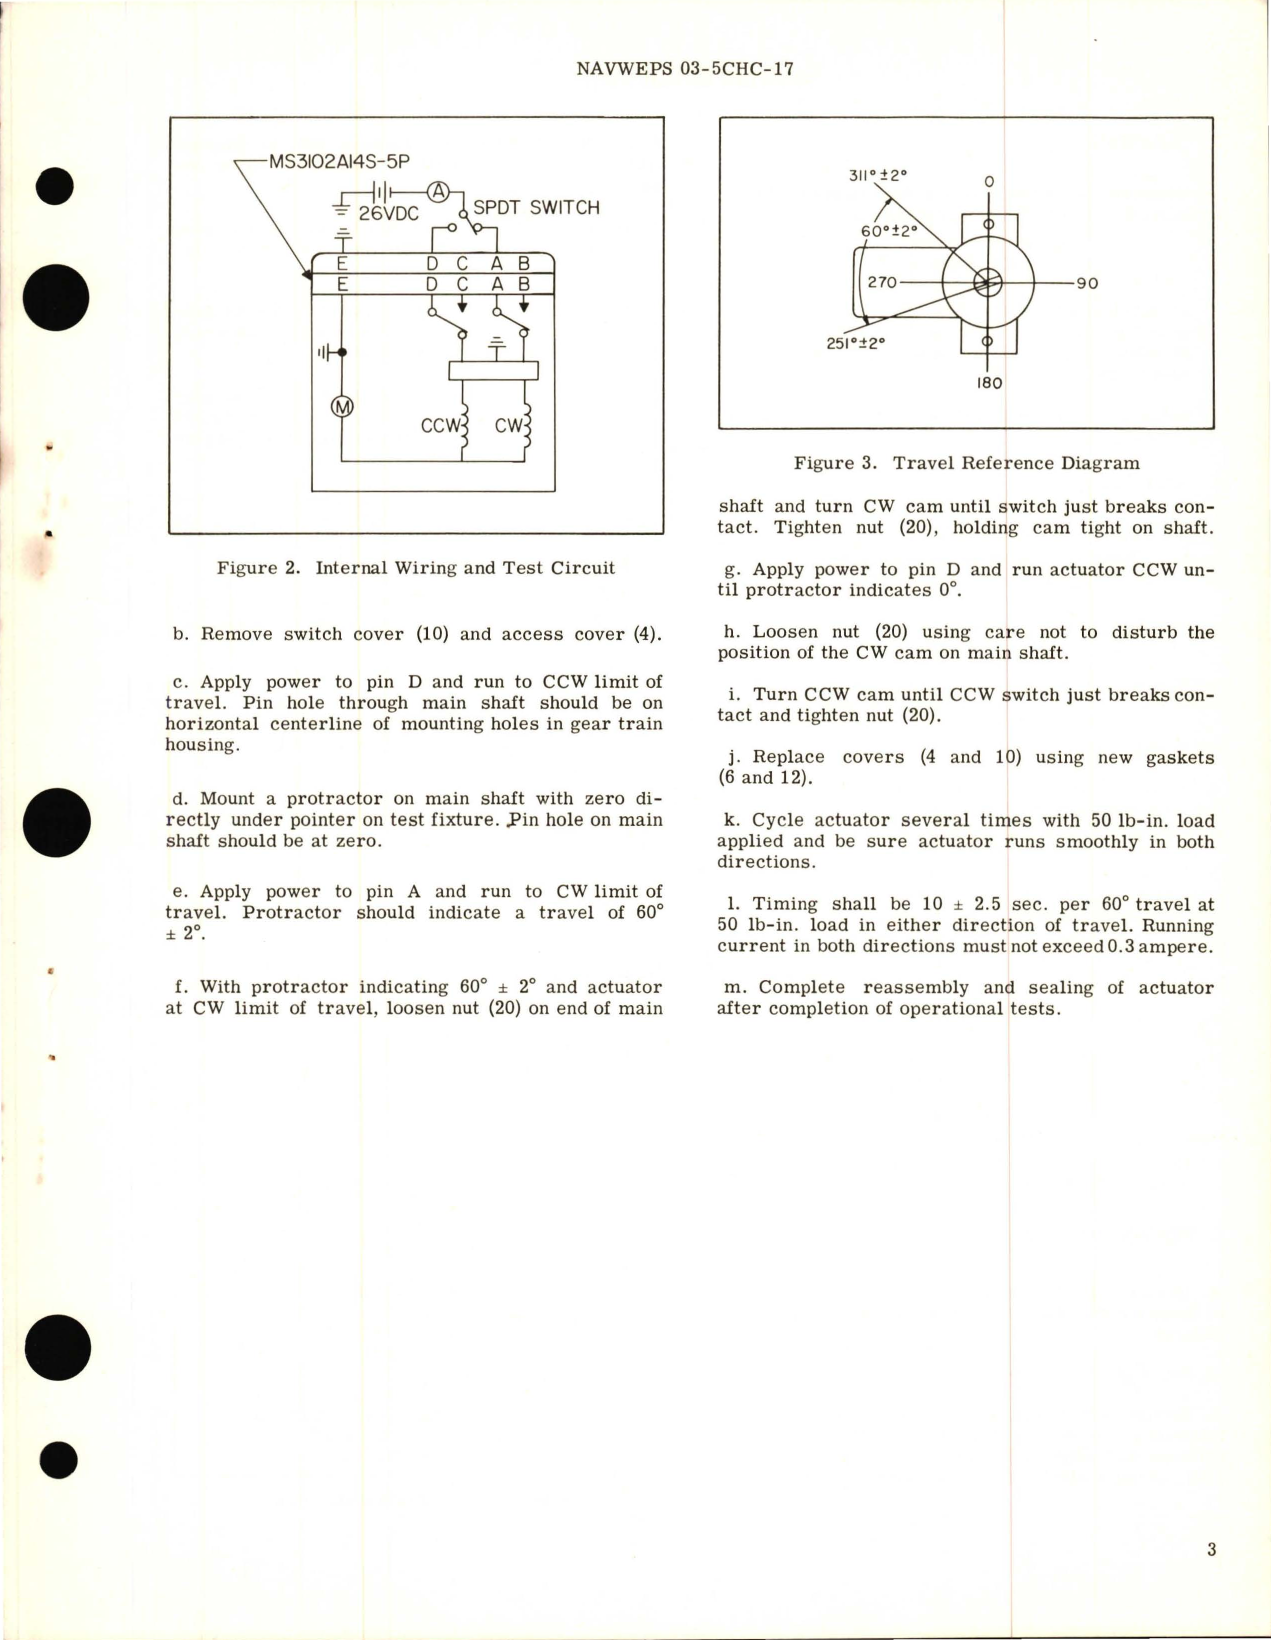 Sample page 5 from AirCorps Library document: Overhaul Instructions with Parts Breakdown for Electromechanical Rotary Actuator - Part GYLC 6962 